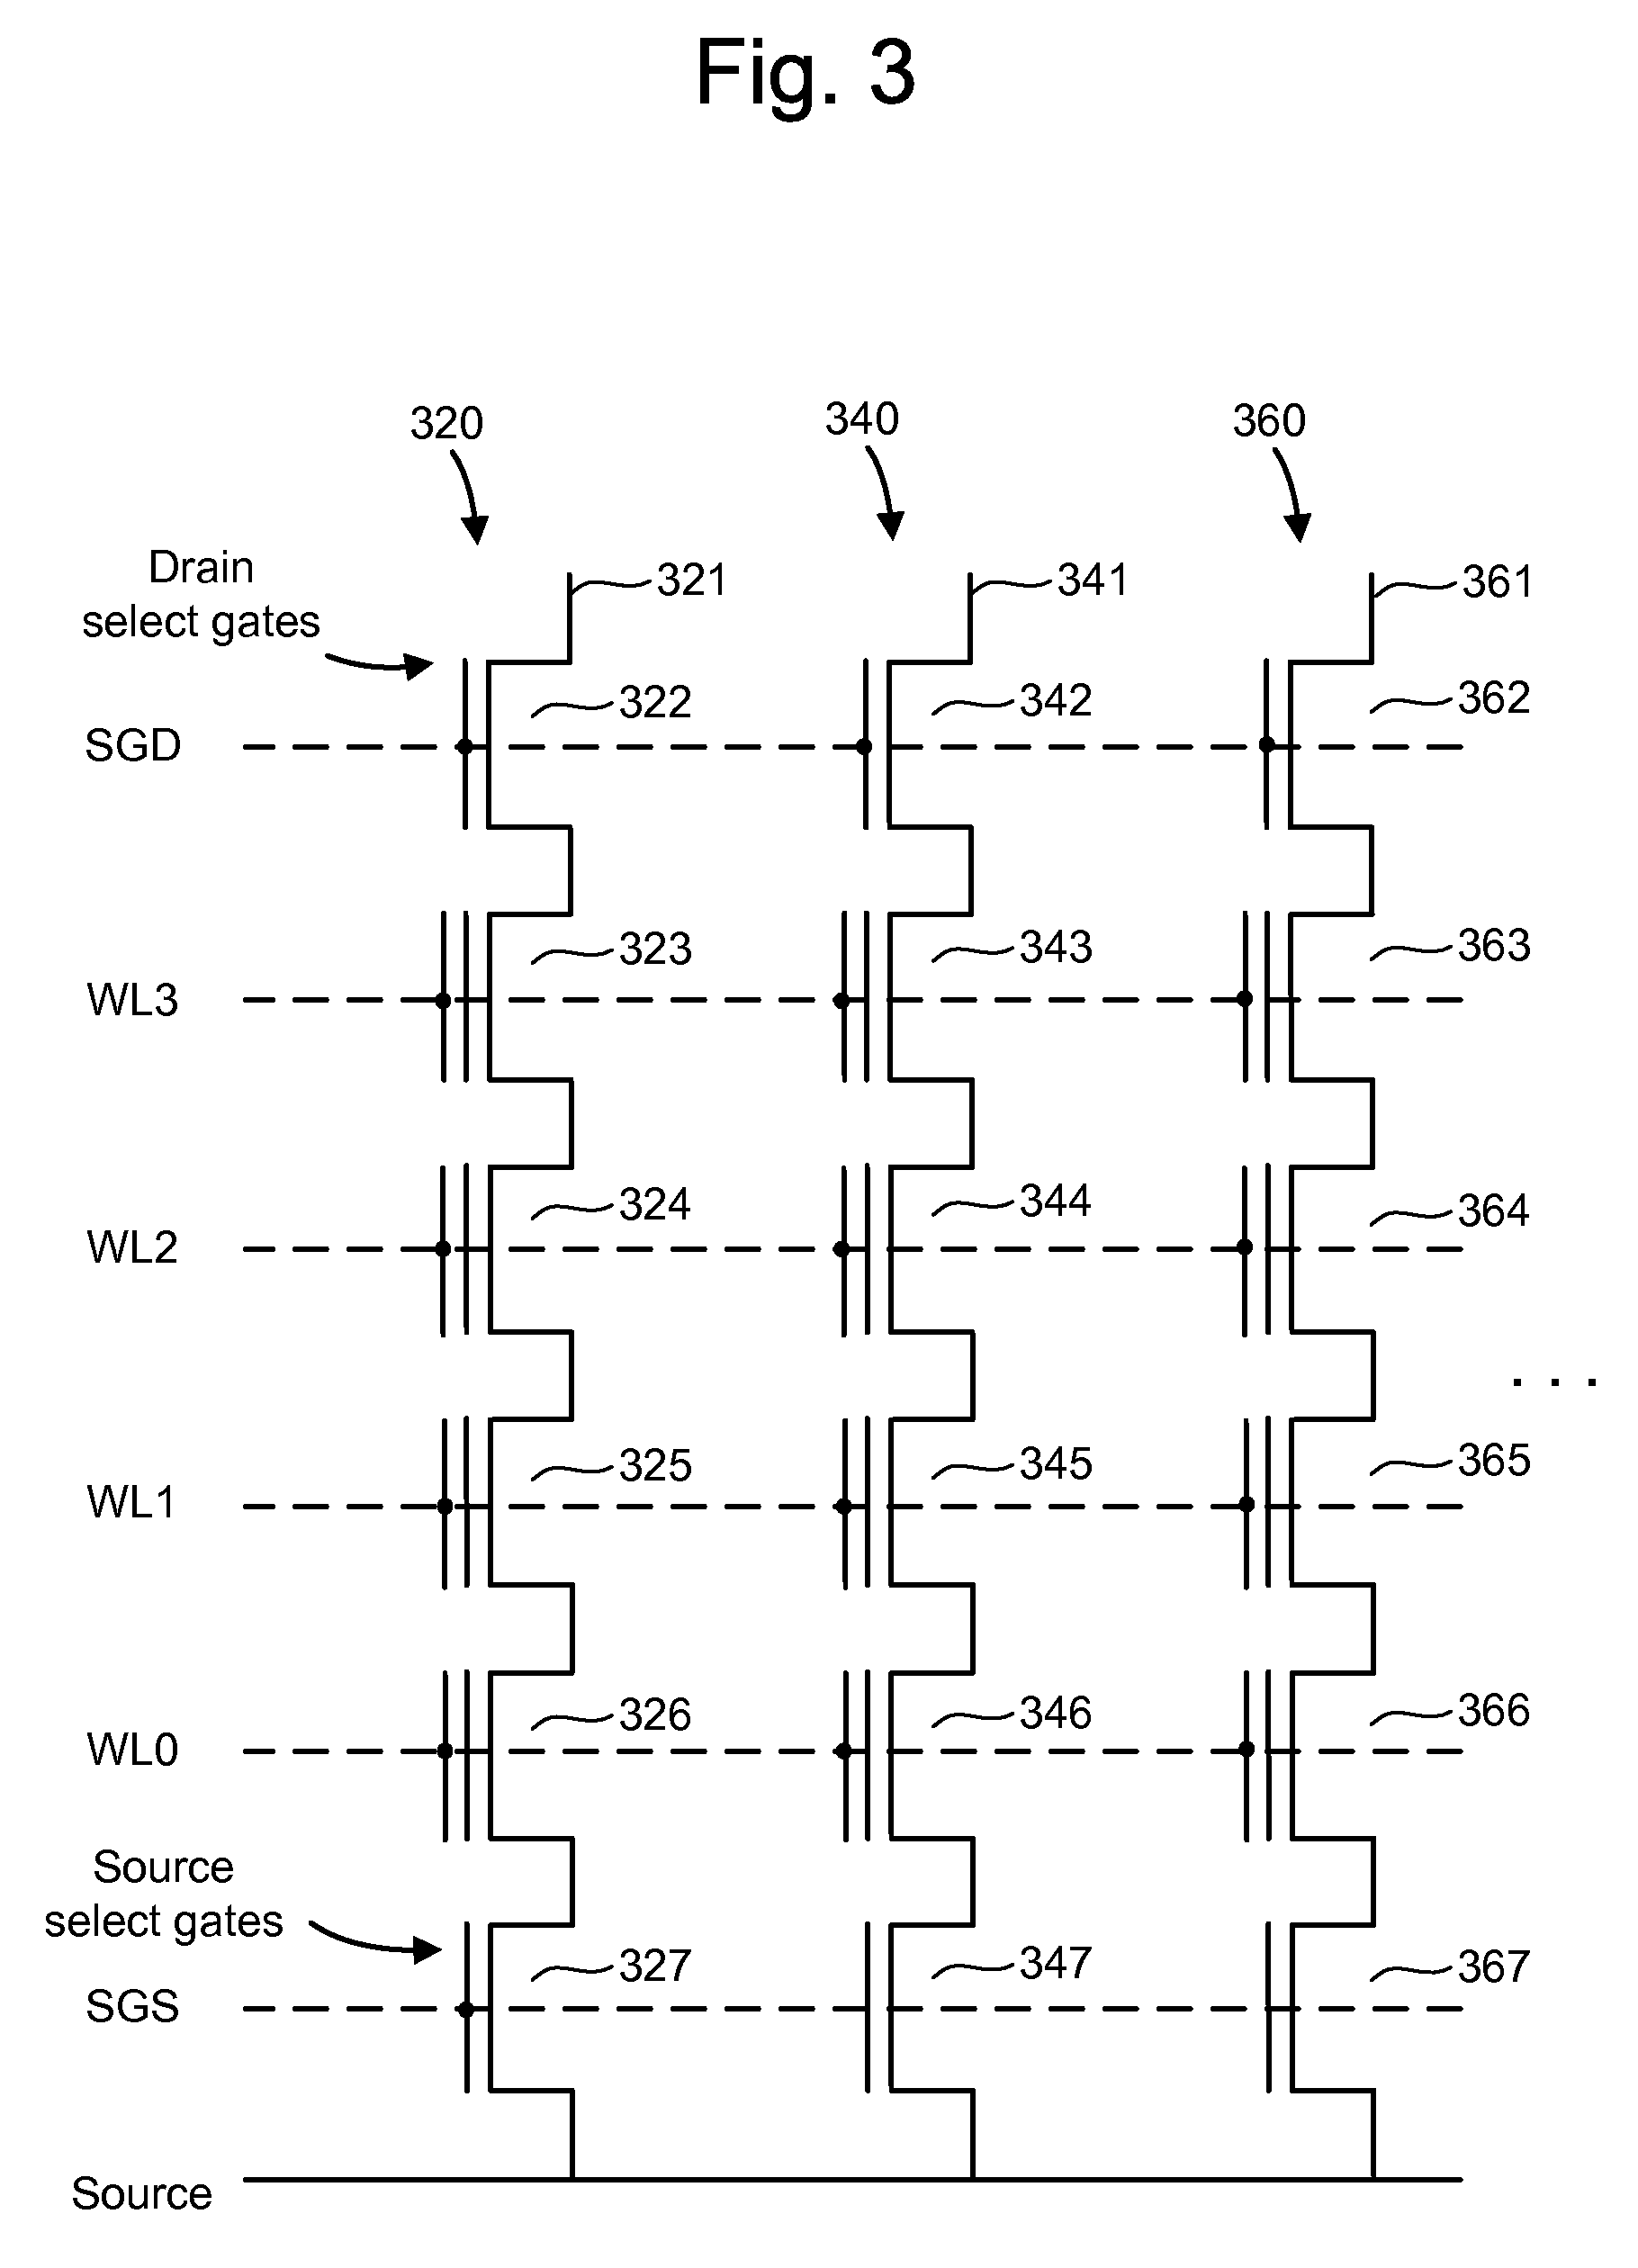 Non-volatile storage with reduced power consumption during read operations